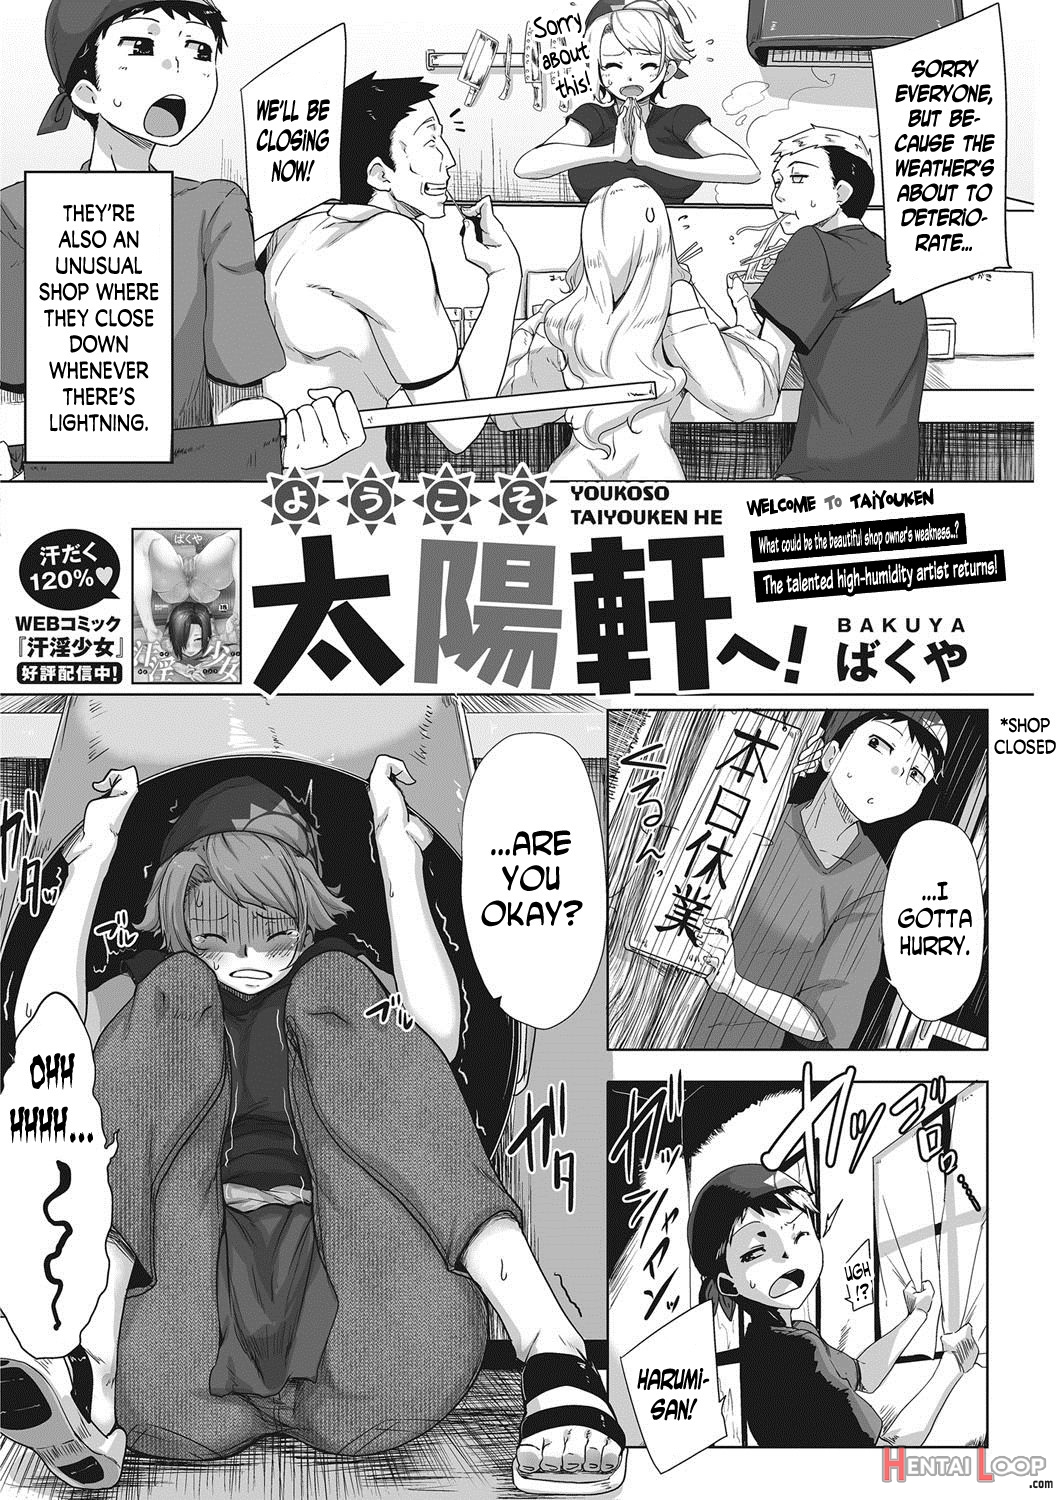 Welcome To Taiyouken page 2